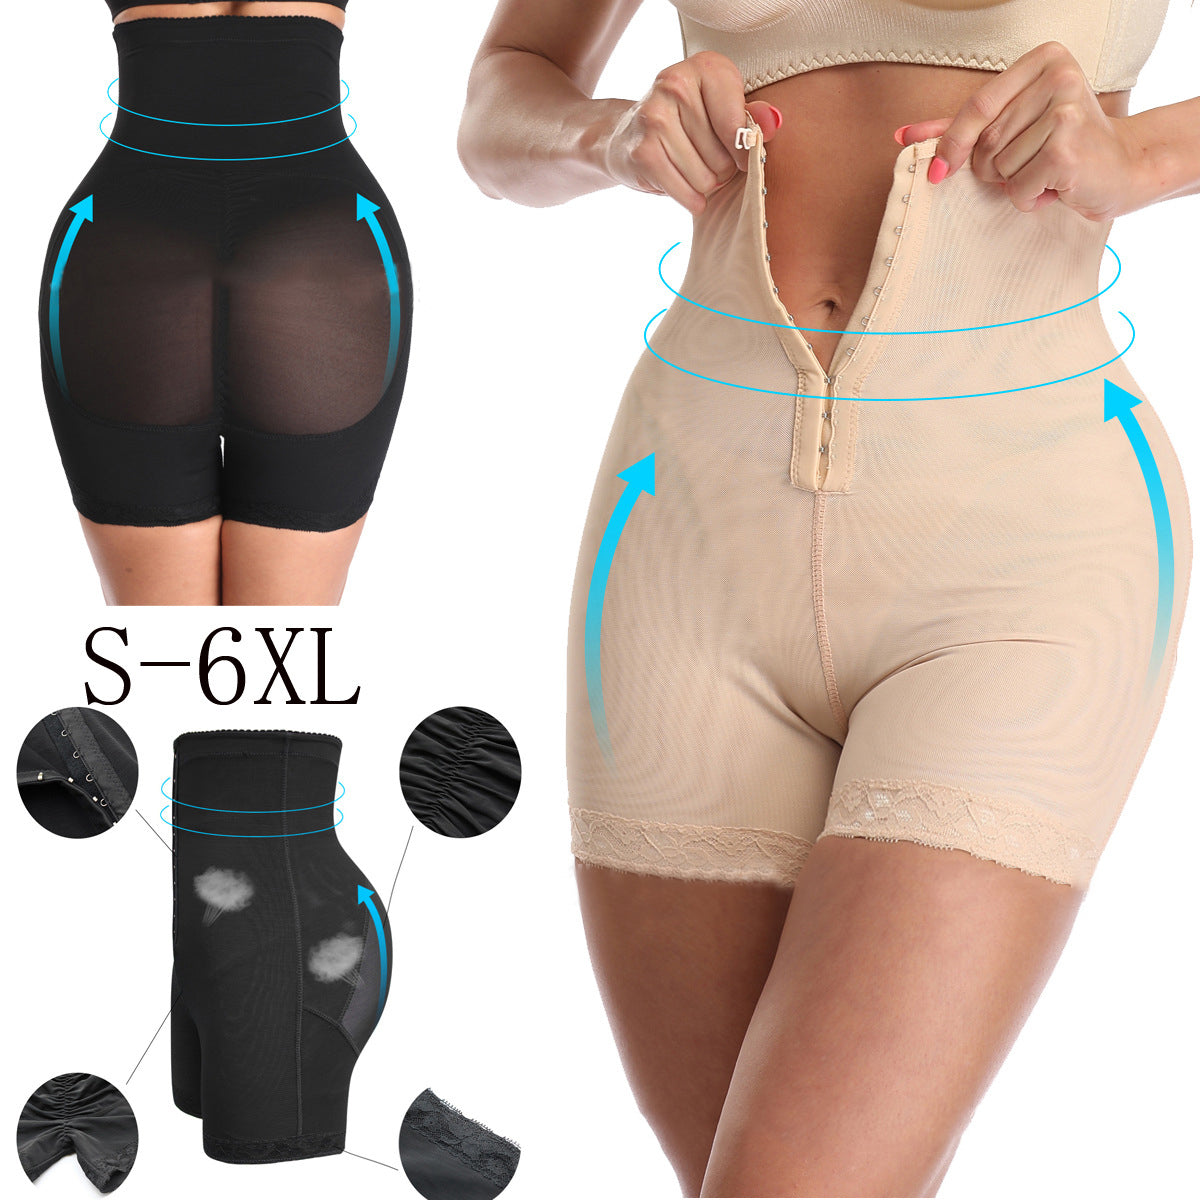 Tummy Control Underwear for Women for Sale Online at Importikaah